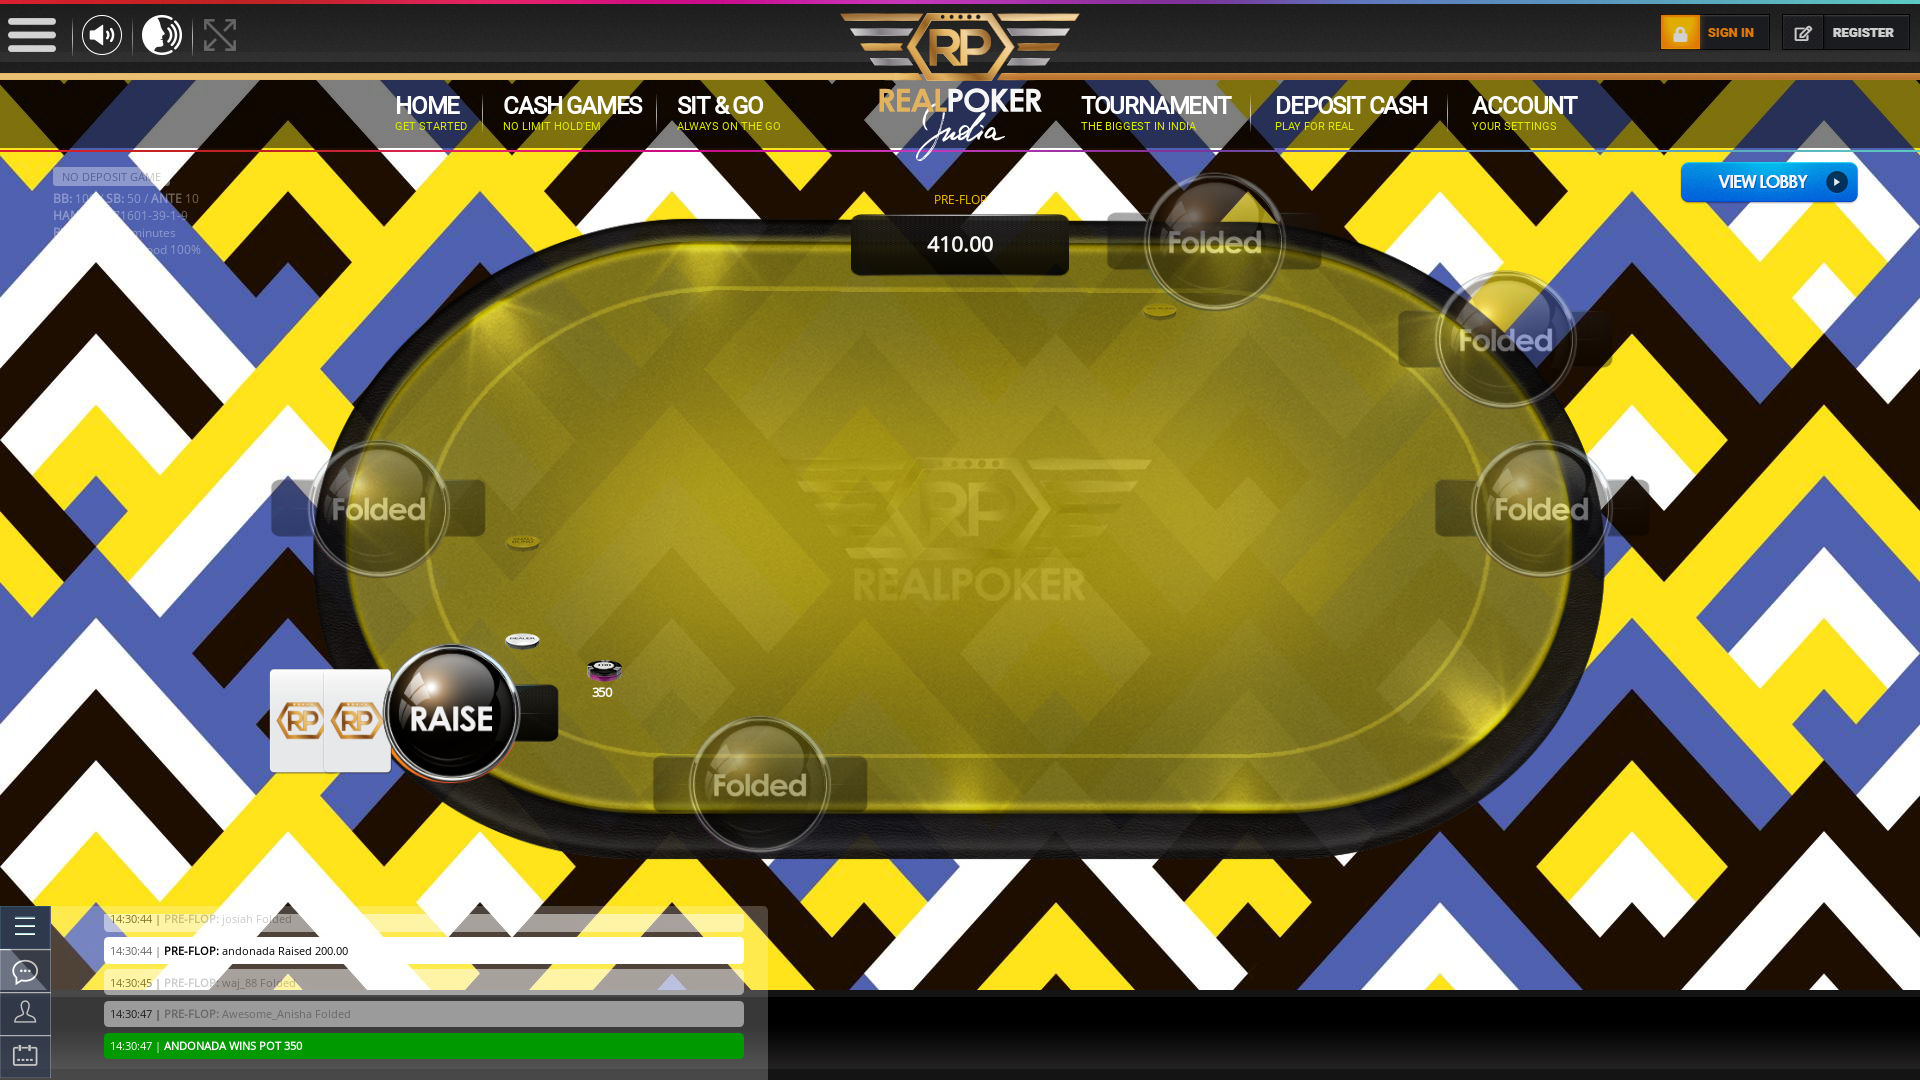 Indian online poker on a 10 player table in the 32nd minute match up